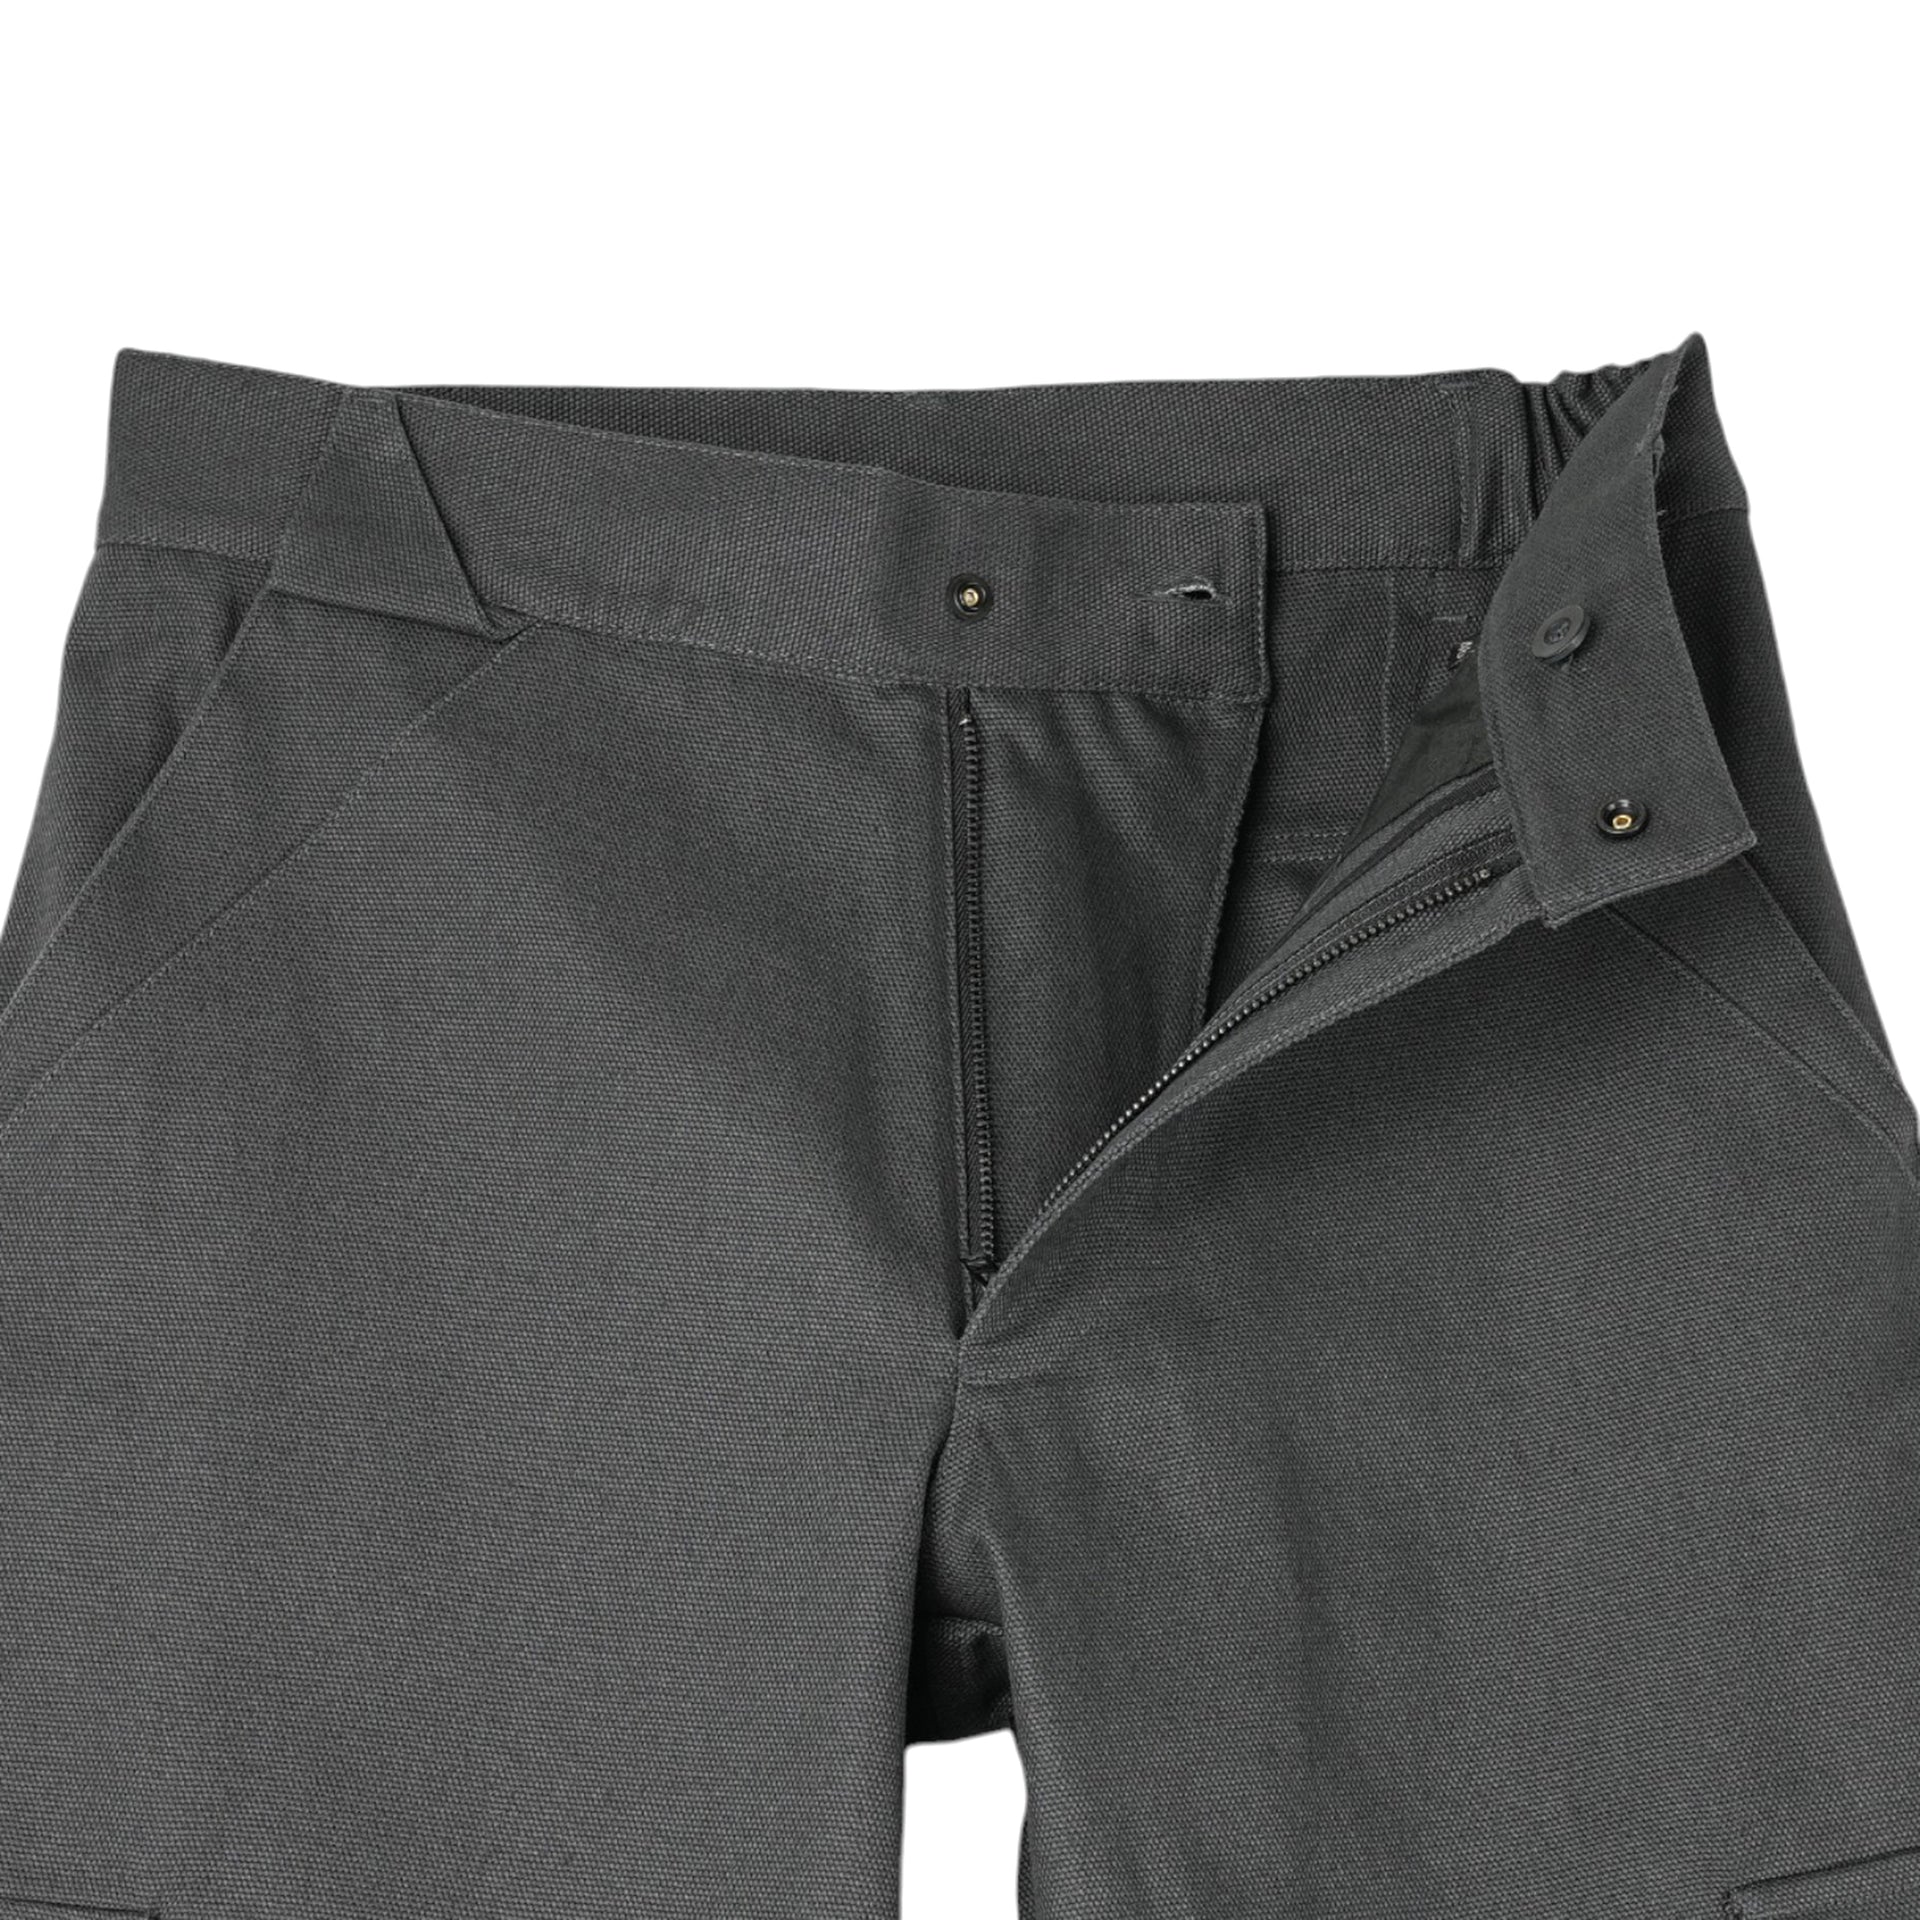 SHANK STRUCTURED PANTS / CONVOY GREY